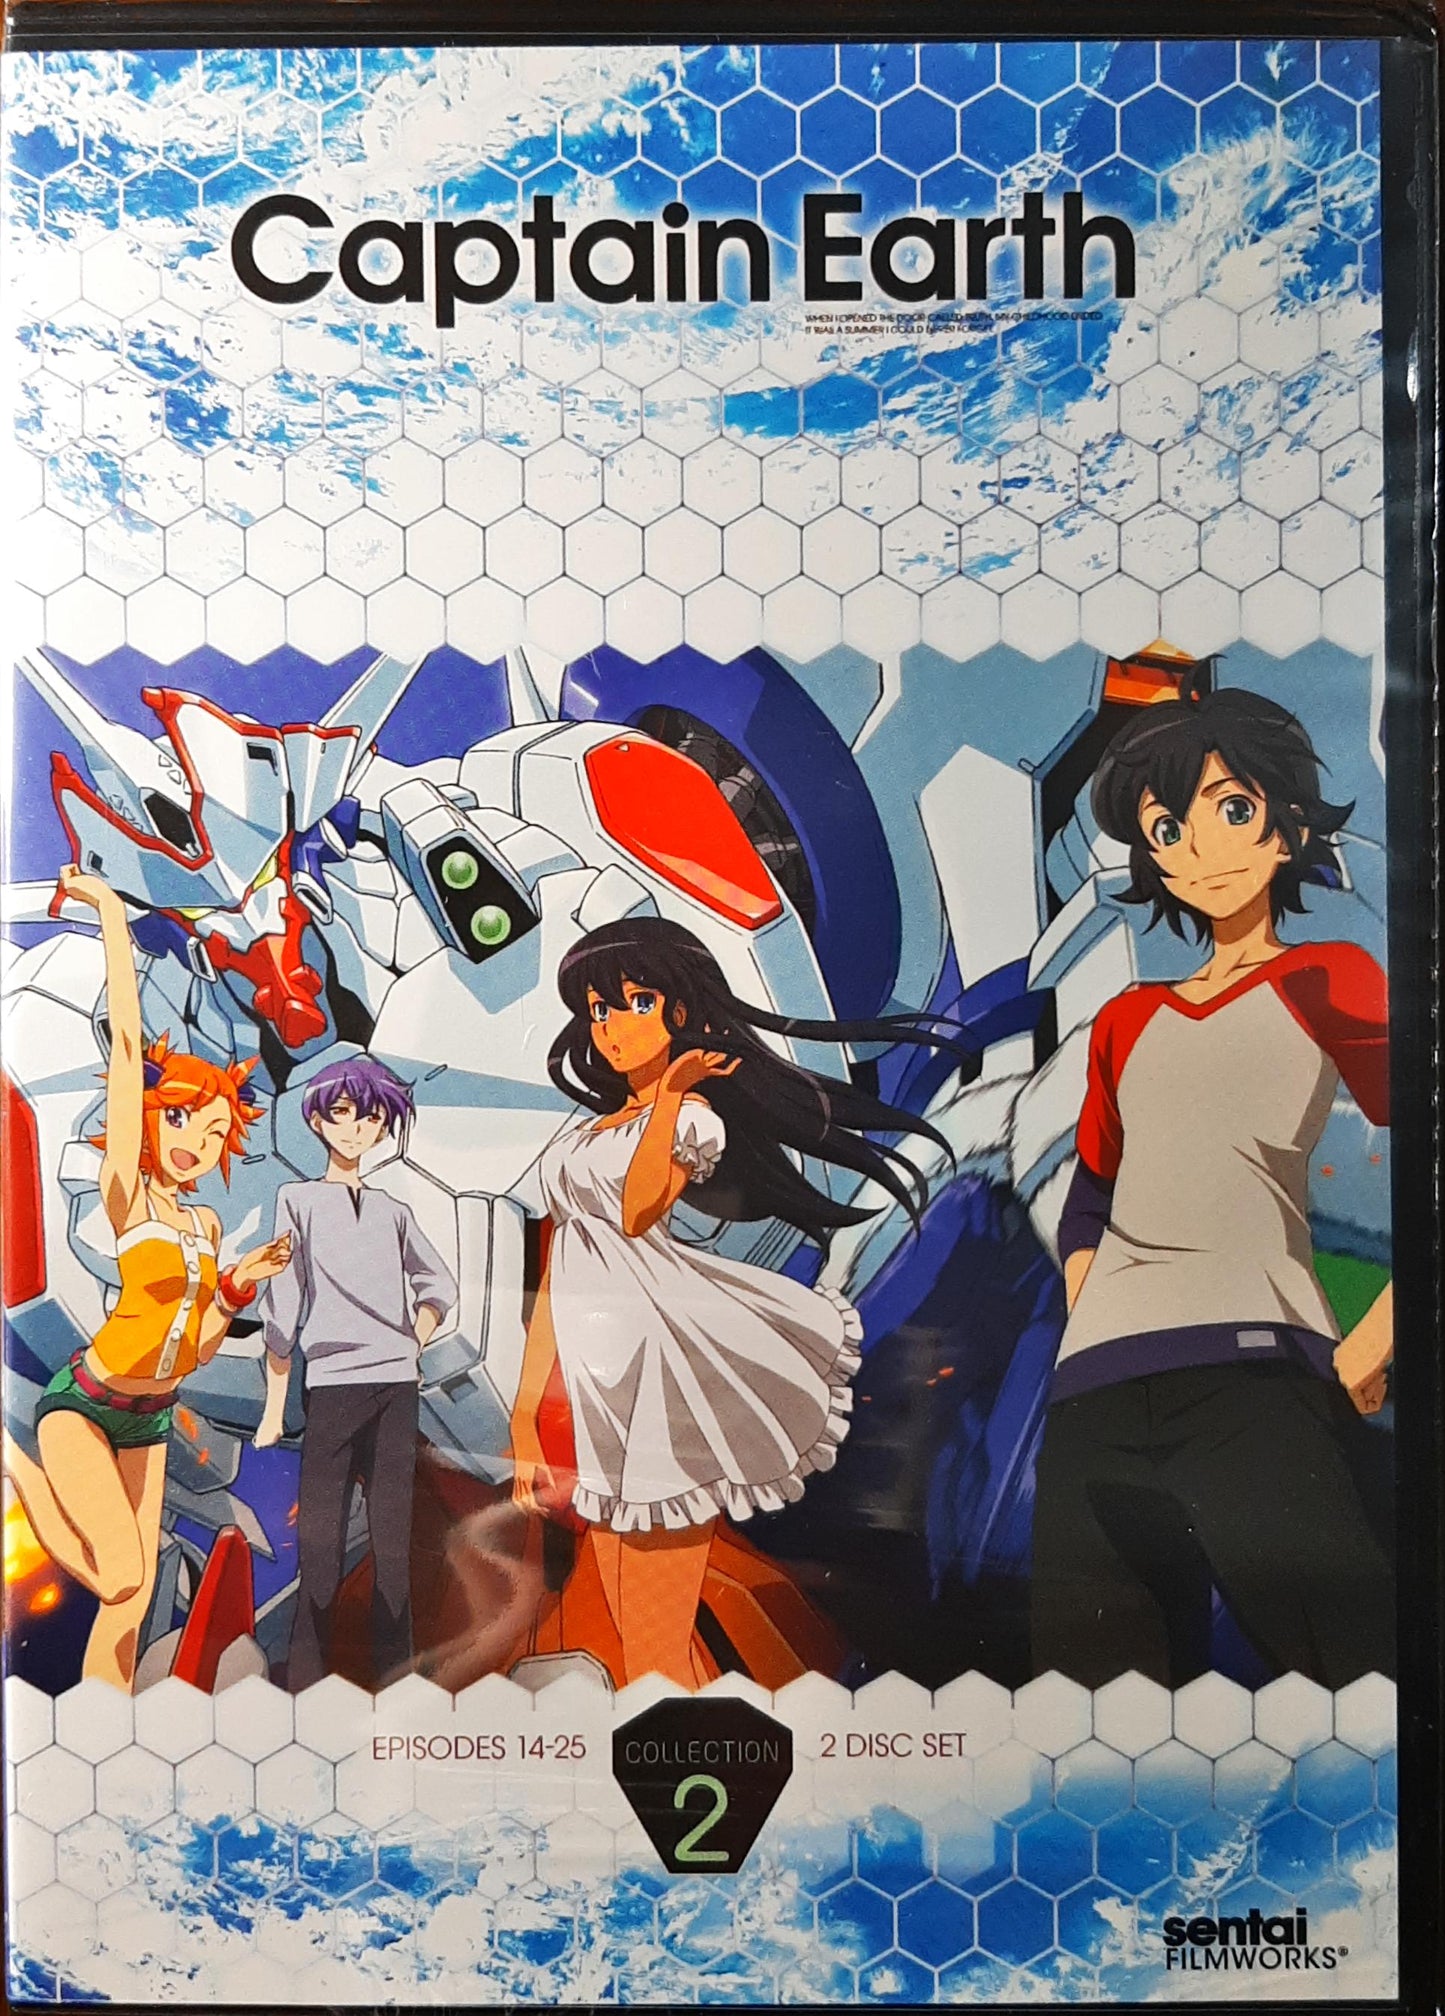 Captain Earth DVD Collection 2 Sealed